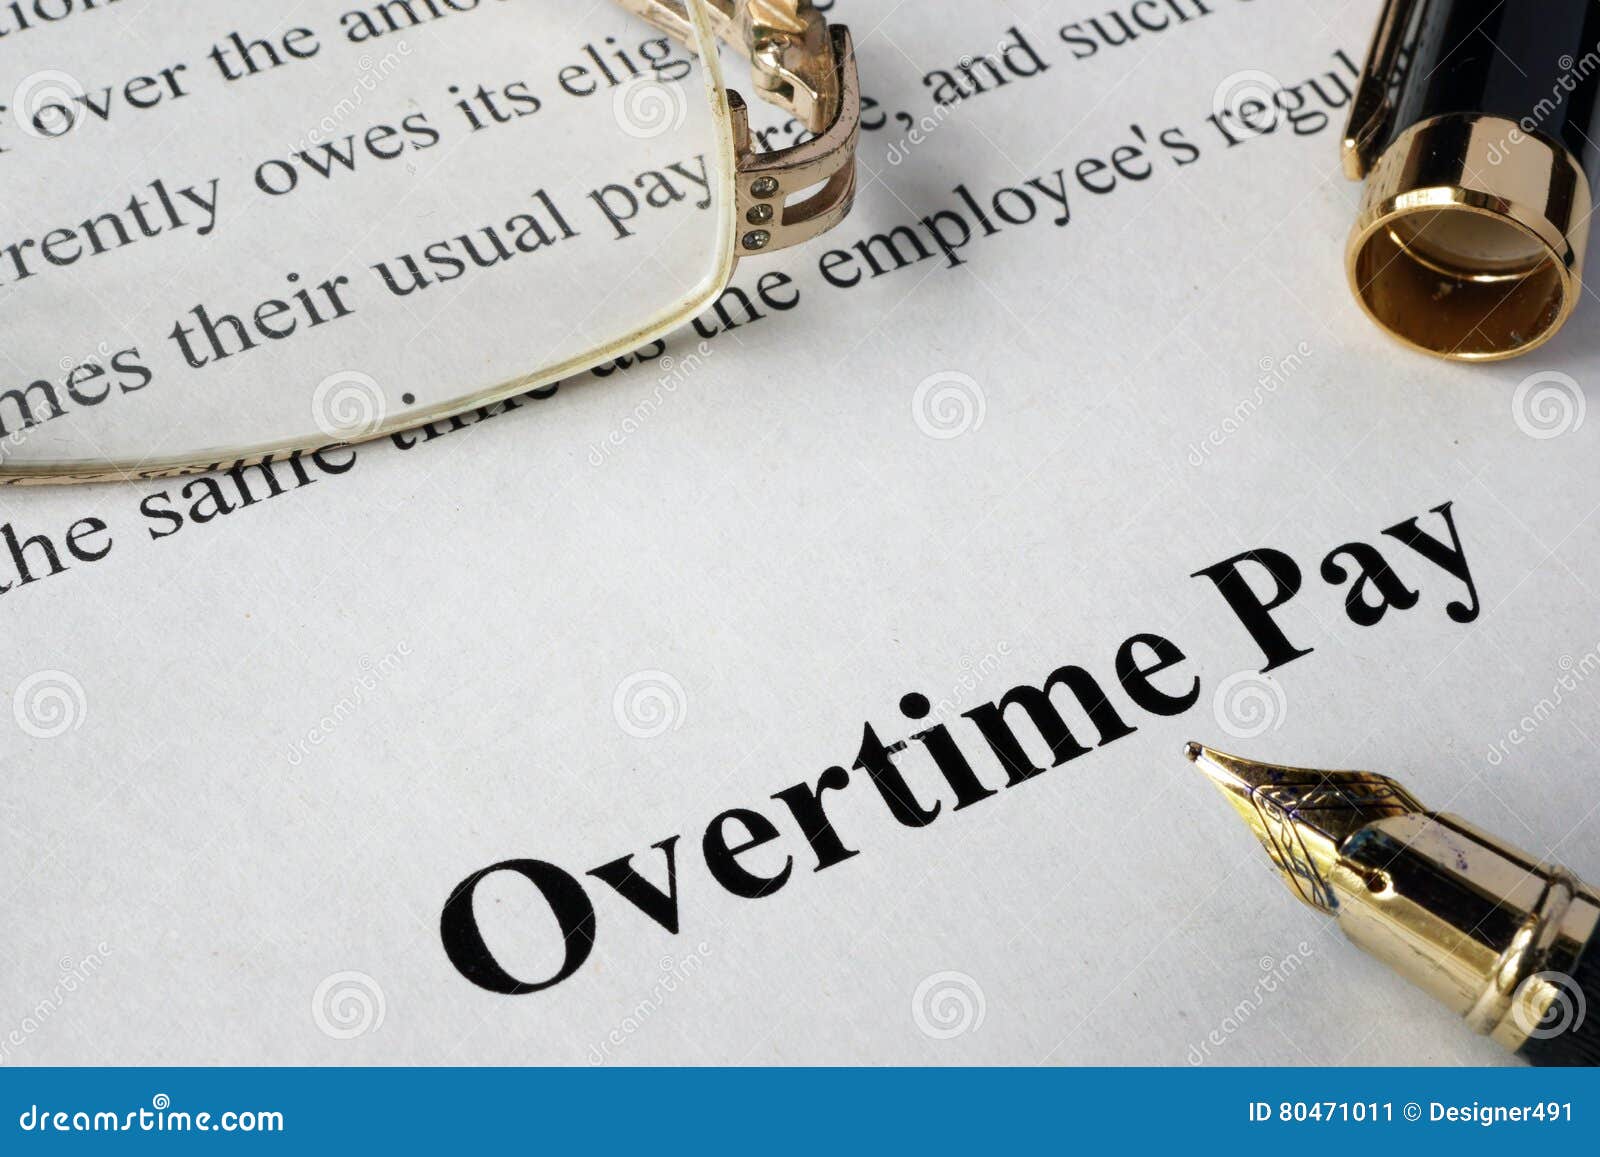 overtime pay concept